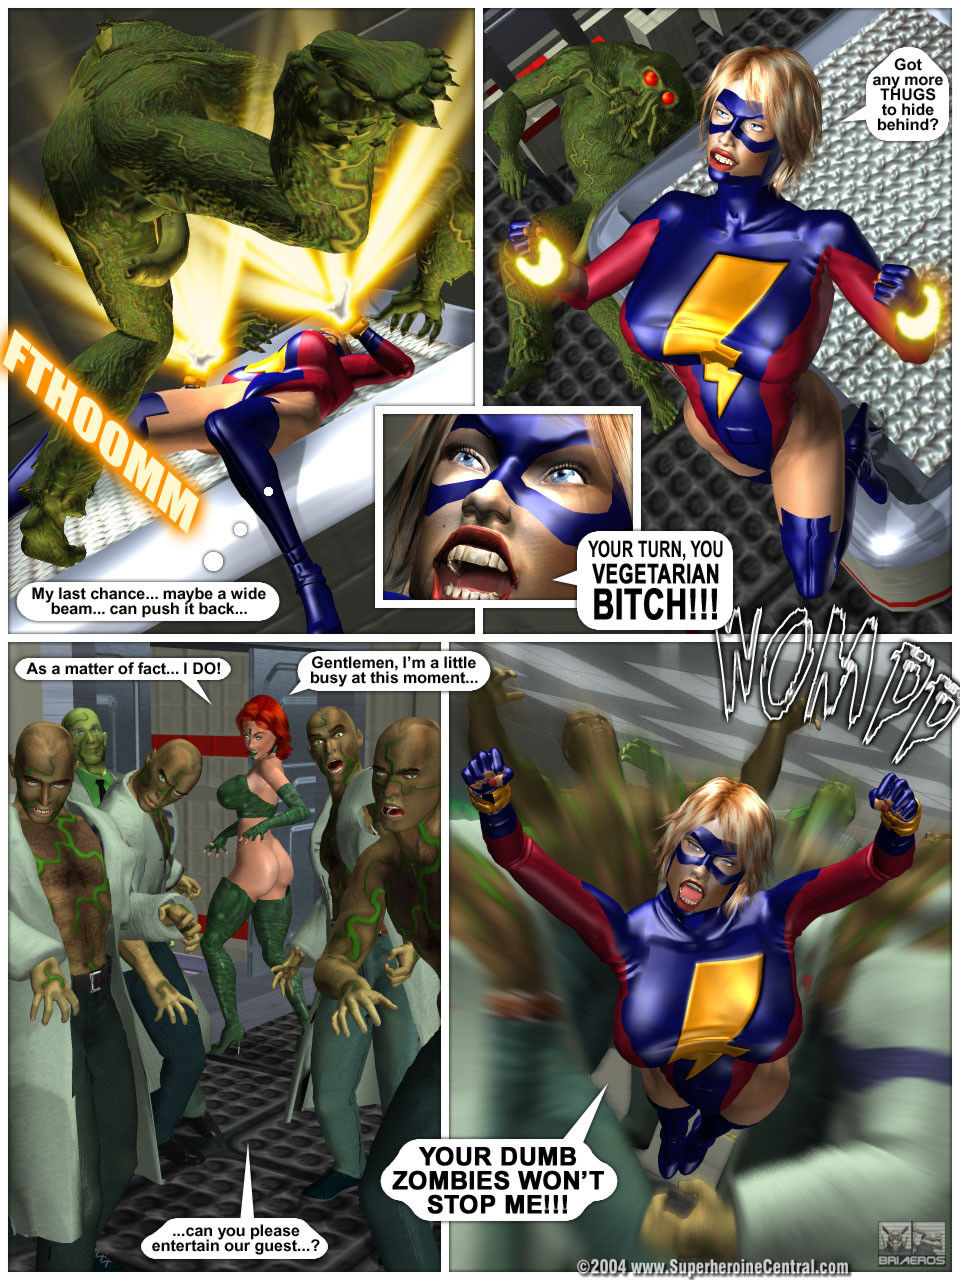 Tall To Arouse - Inside a Green Hell - Superheroinecentral page 18